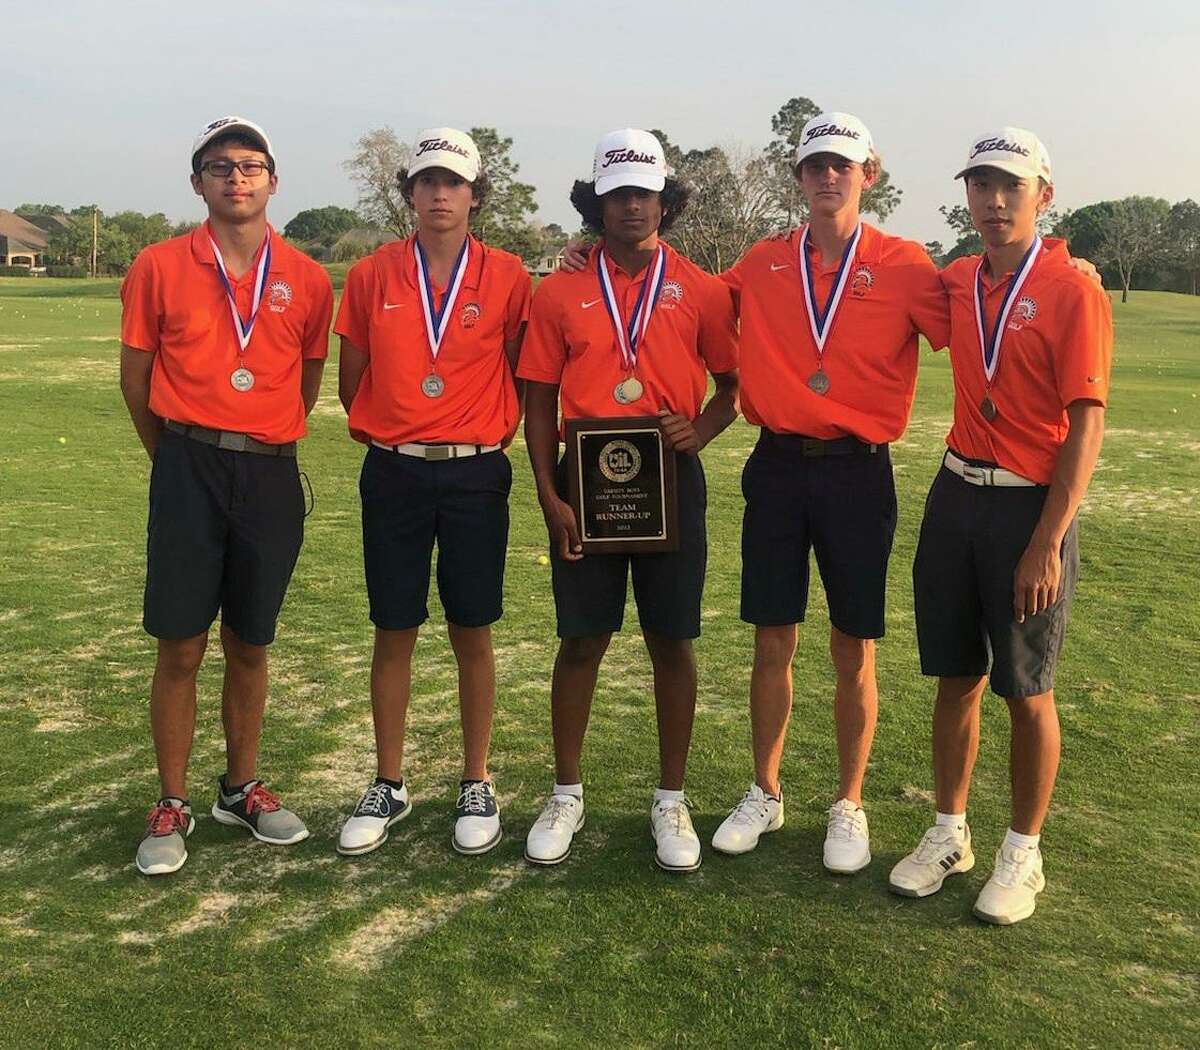 The Seven Lakes boys golf team advanced to the Region III-6A tournament with a second-place finish at the District 19-6A tournament April 4-5 at The Club at Falcon Point.